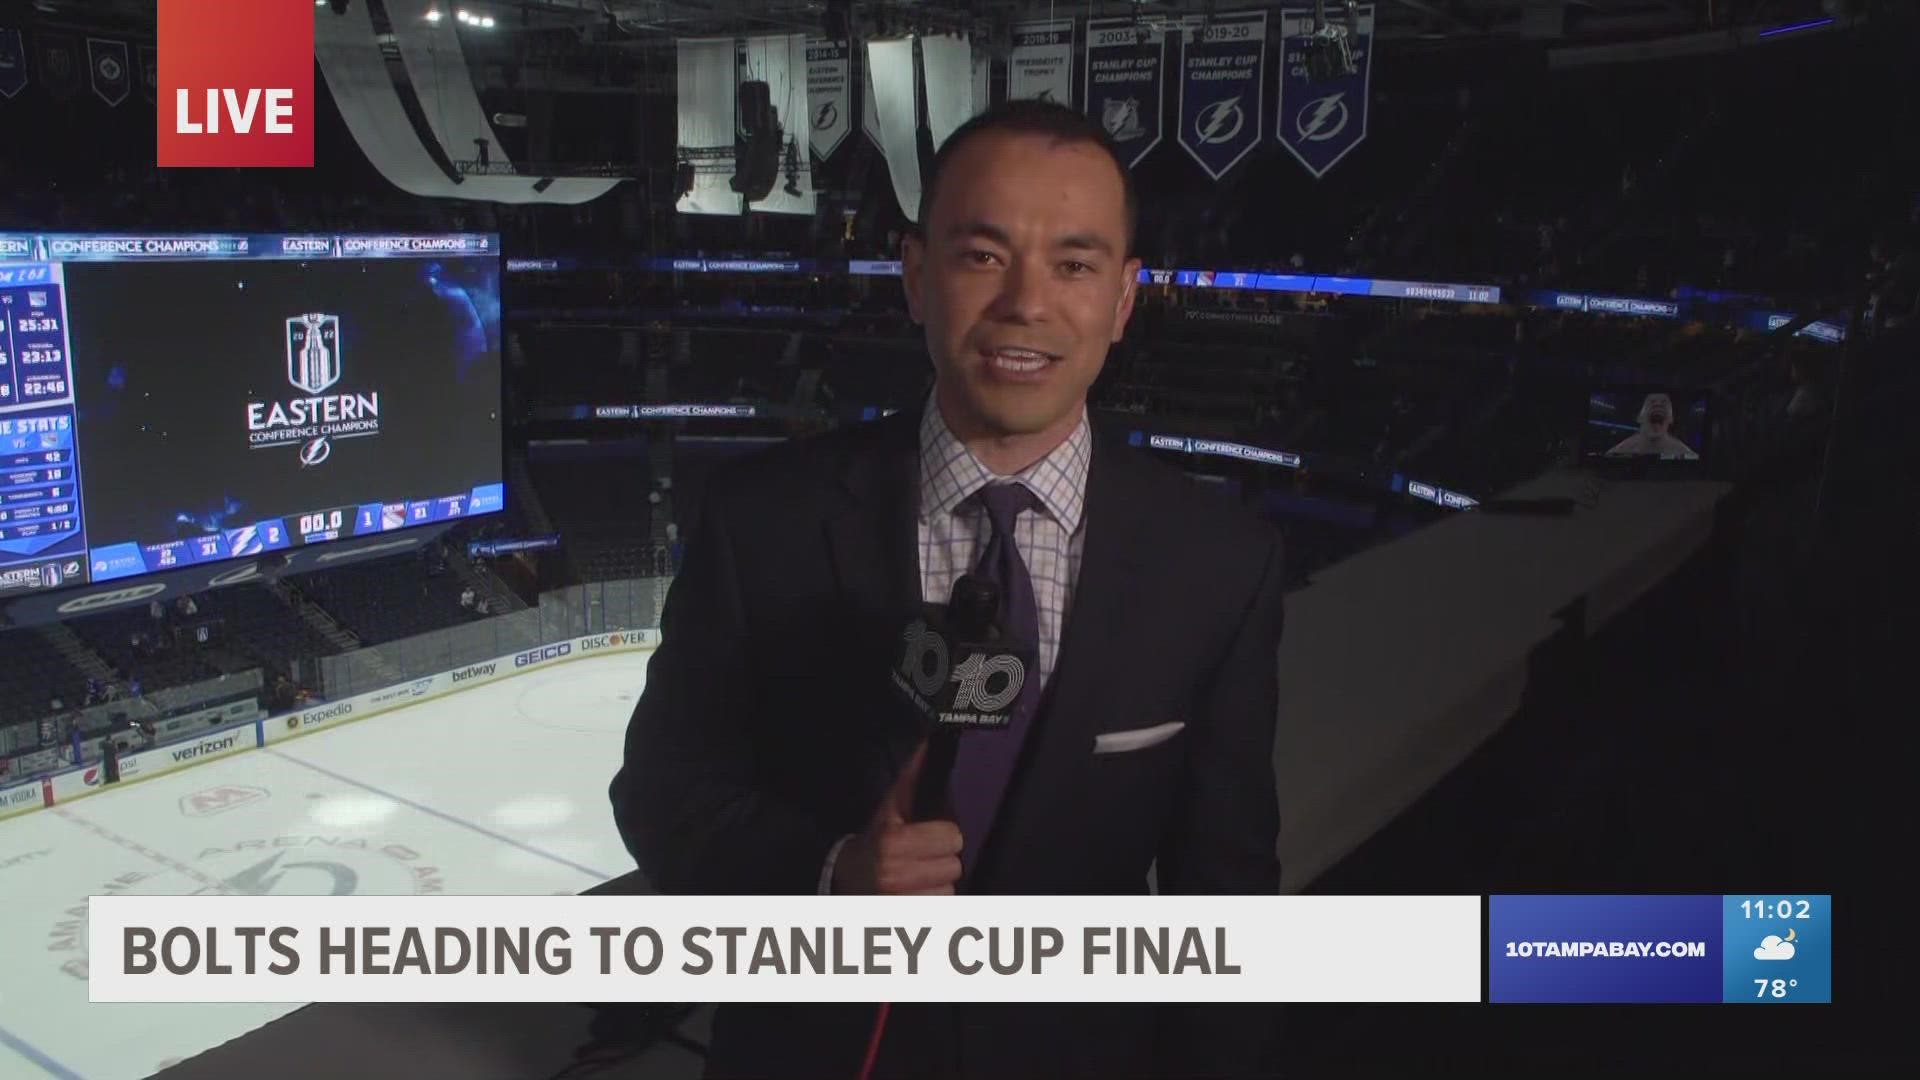 The Tampa Bay Lightning will go up against the Colorado Avalanche in the Stanley Cup Final.